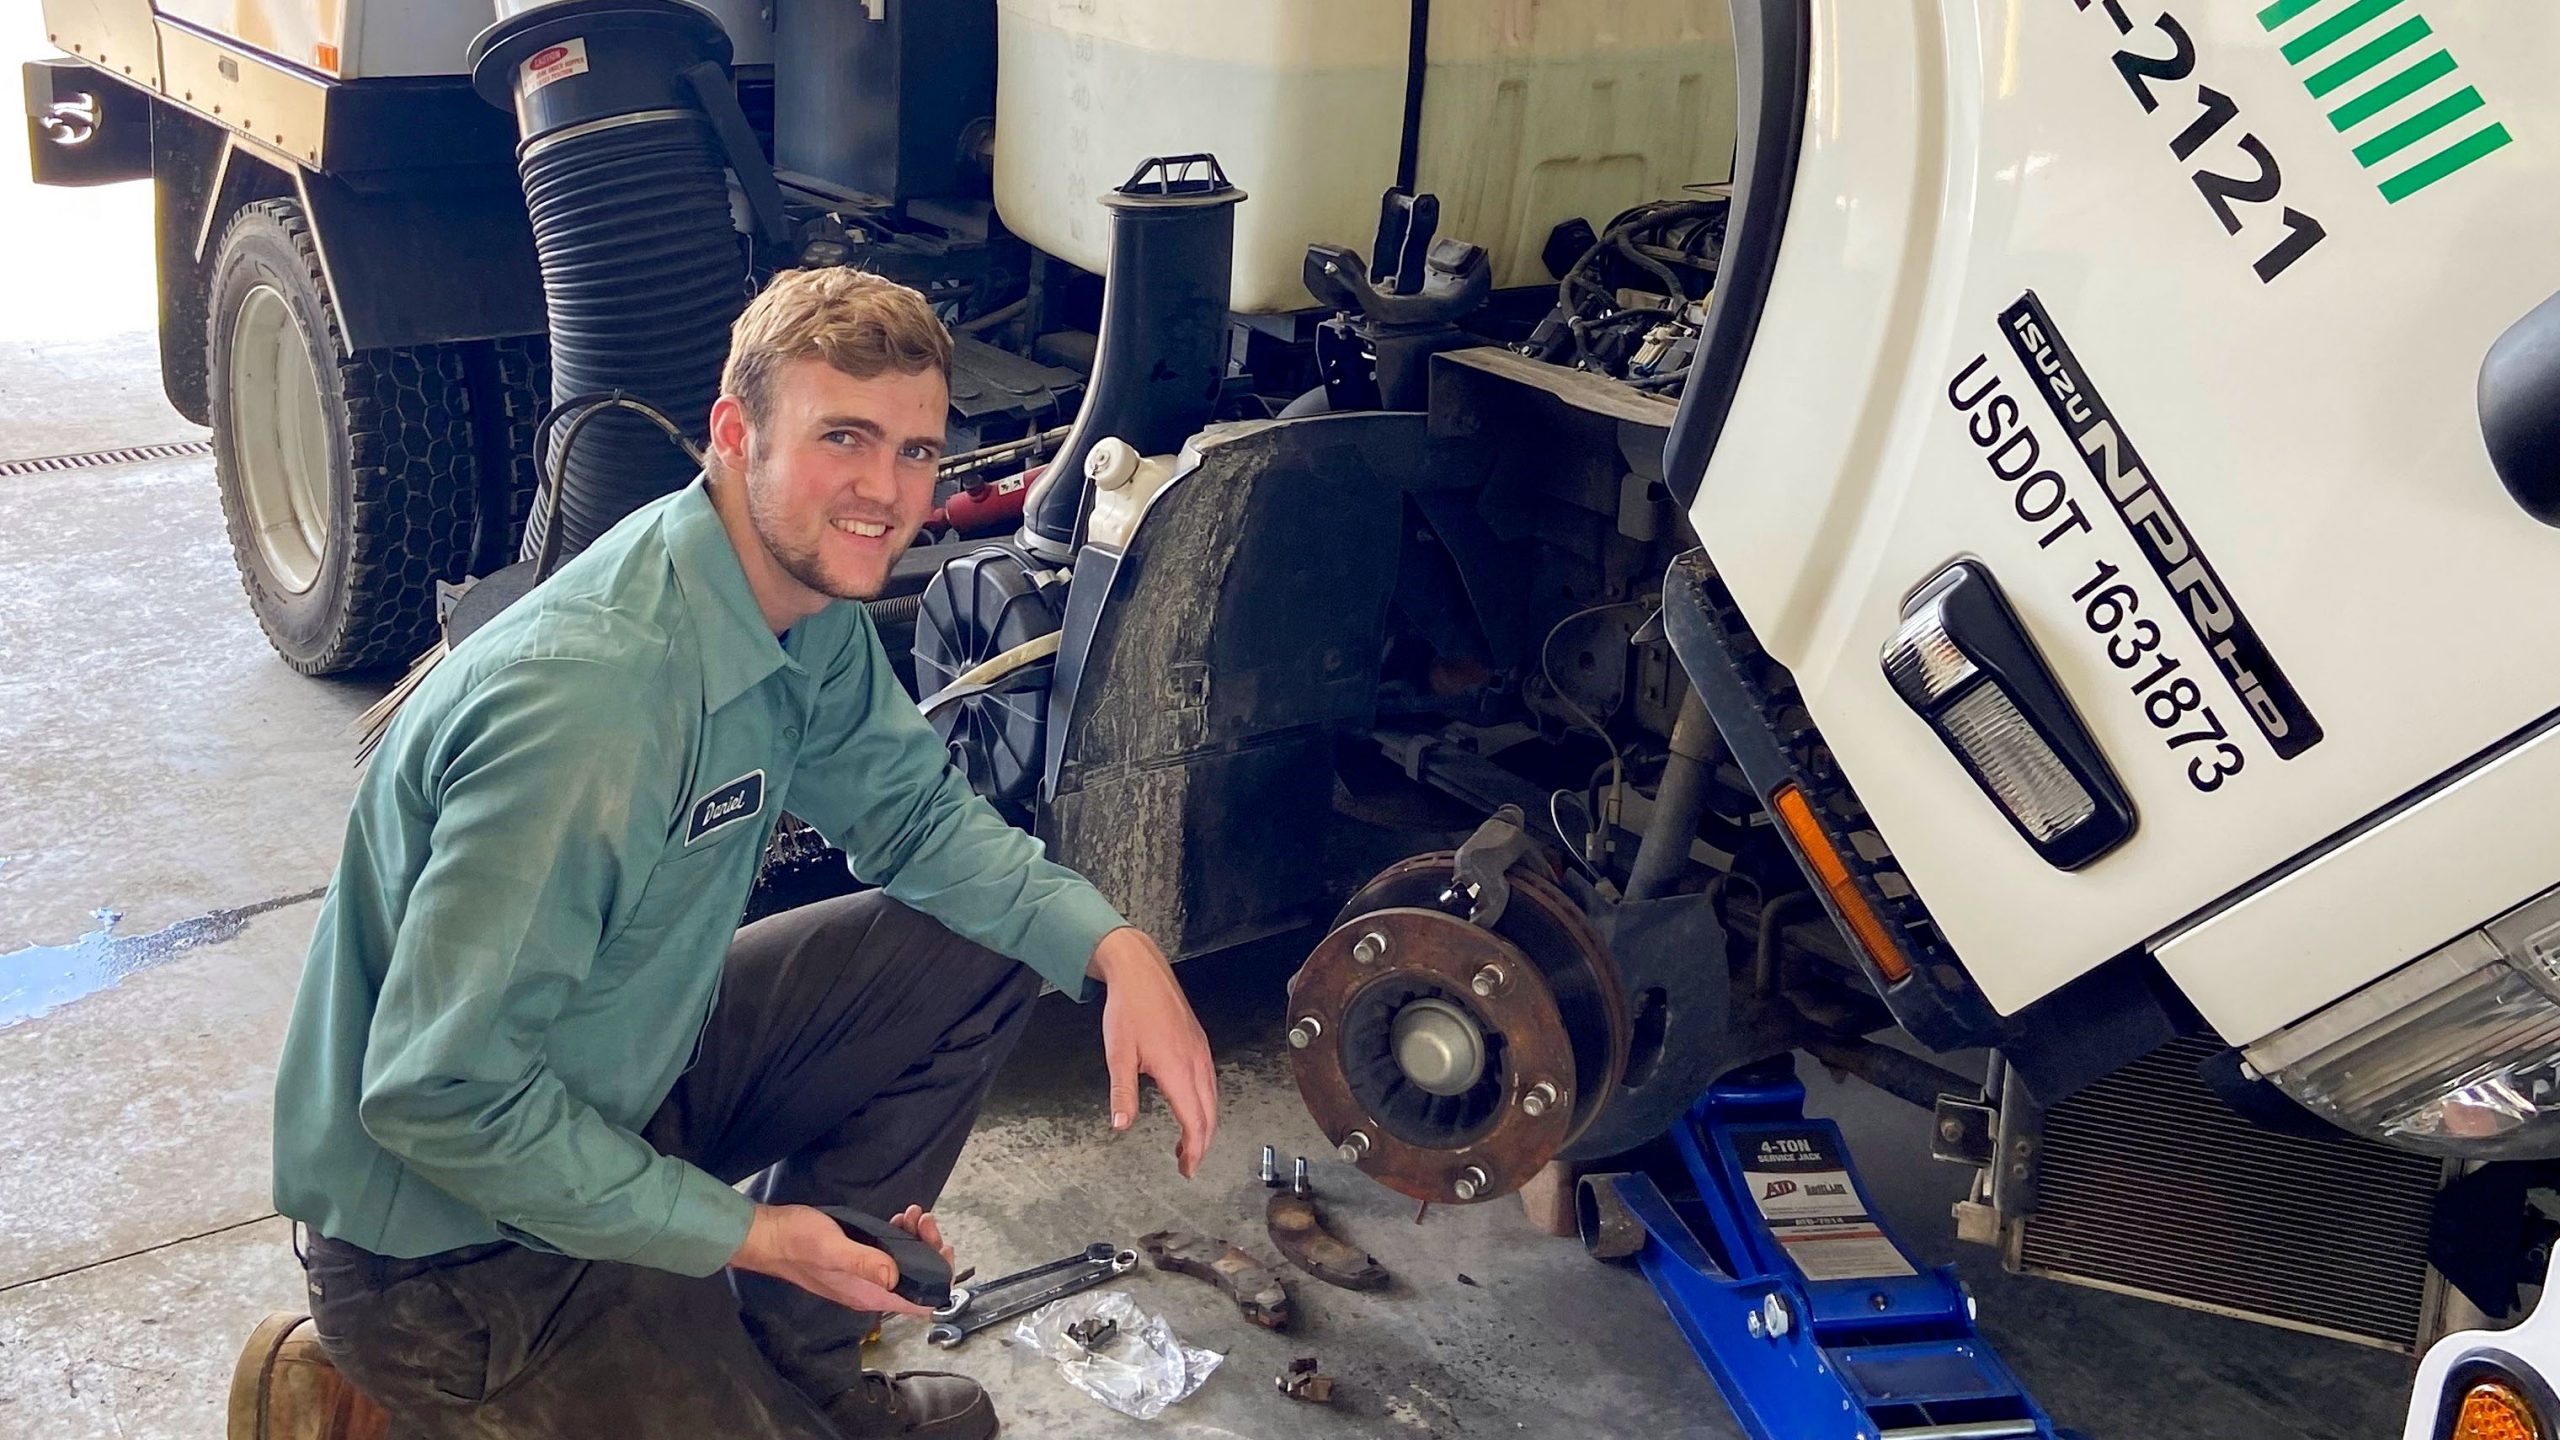 Apprentice at Curbo works on a truck